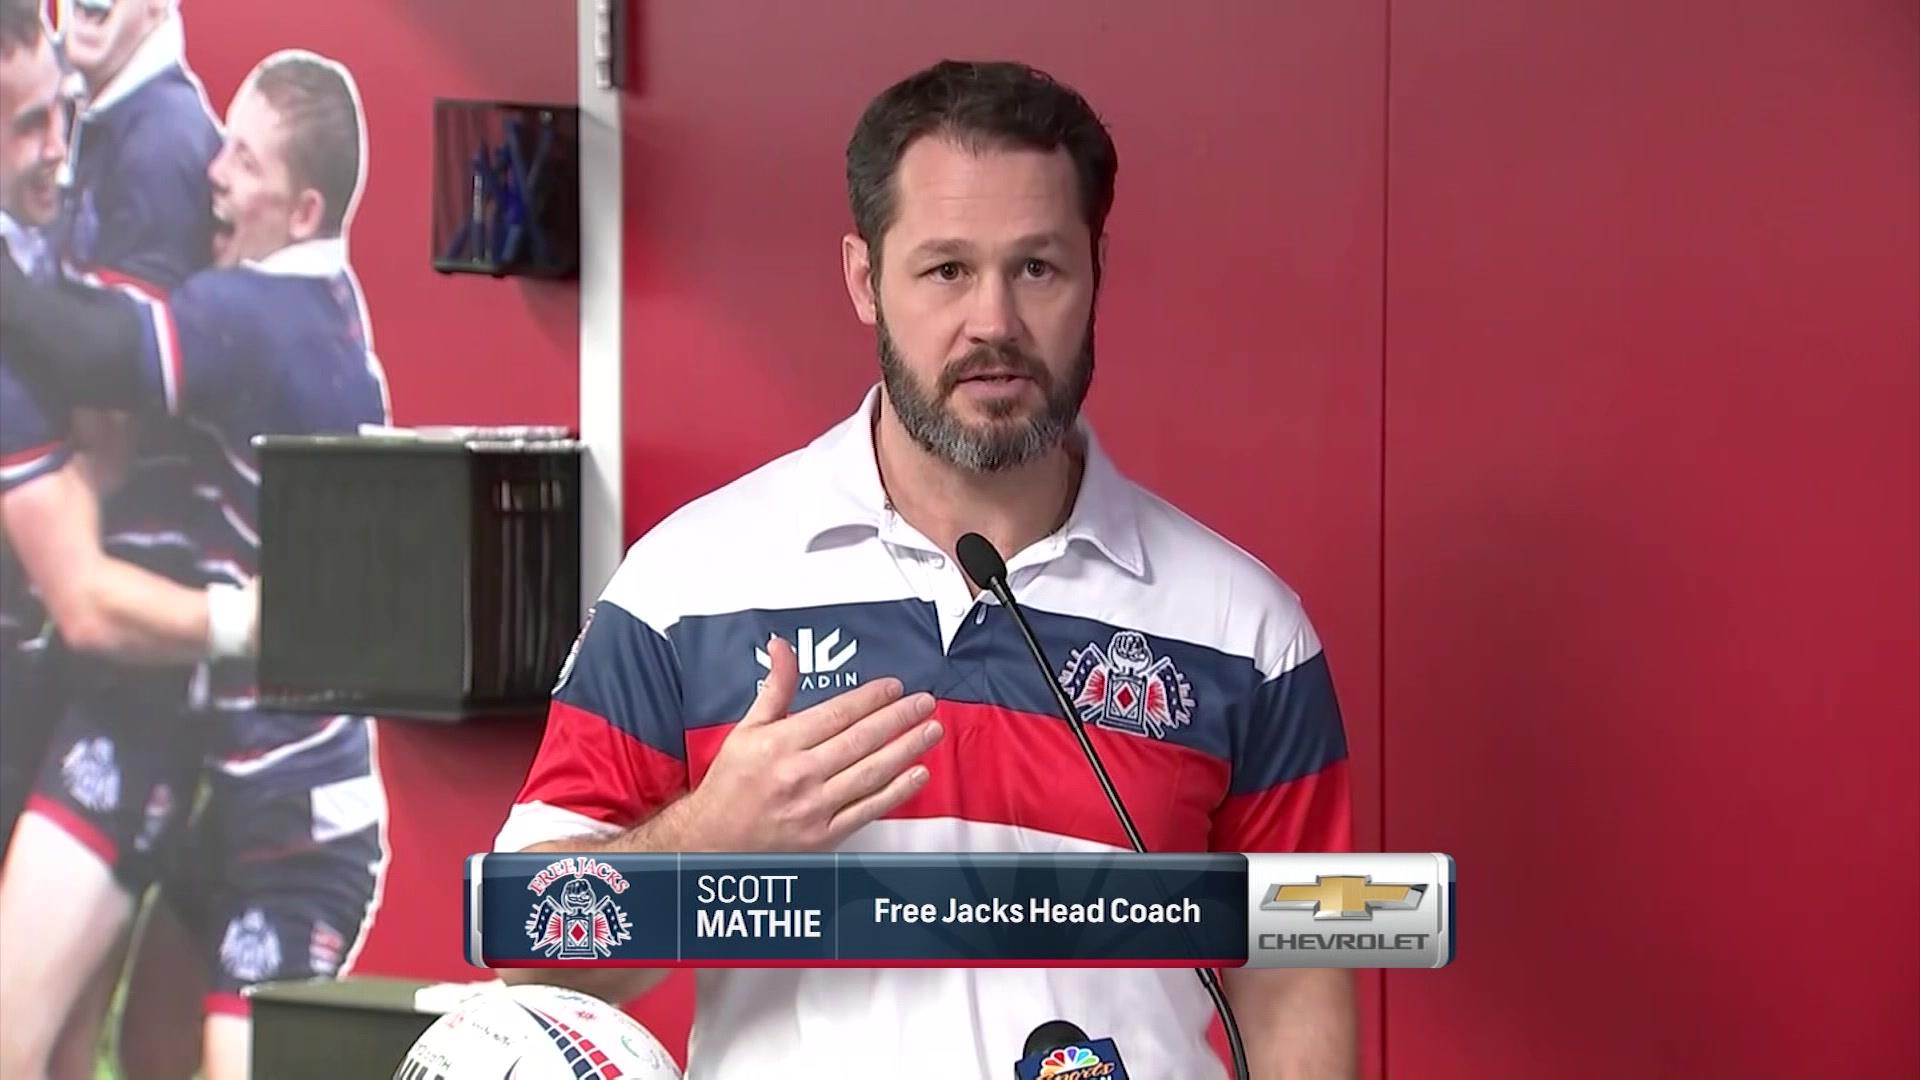 New England Free Jacks unveil new rugby training center in Quincy